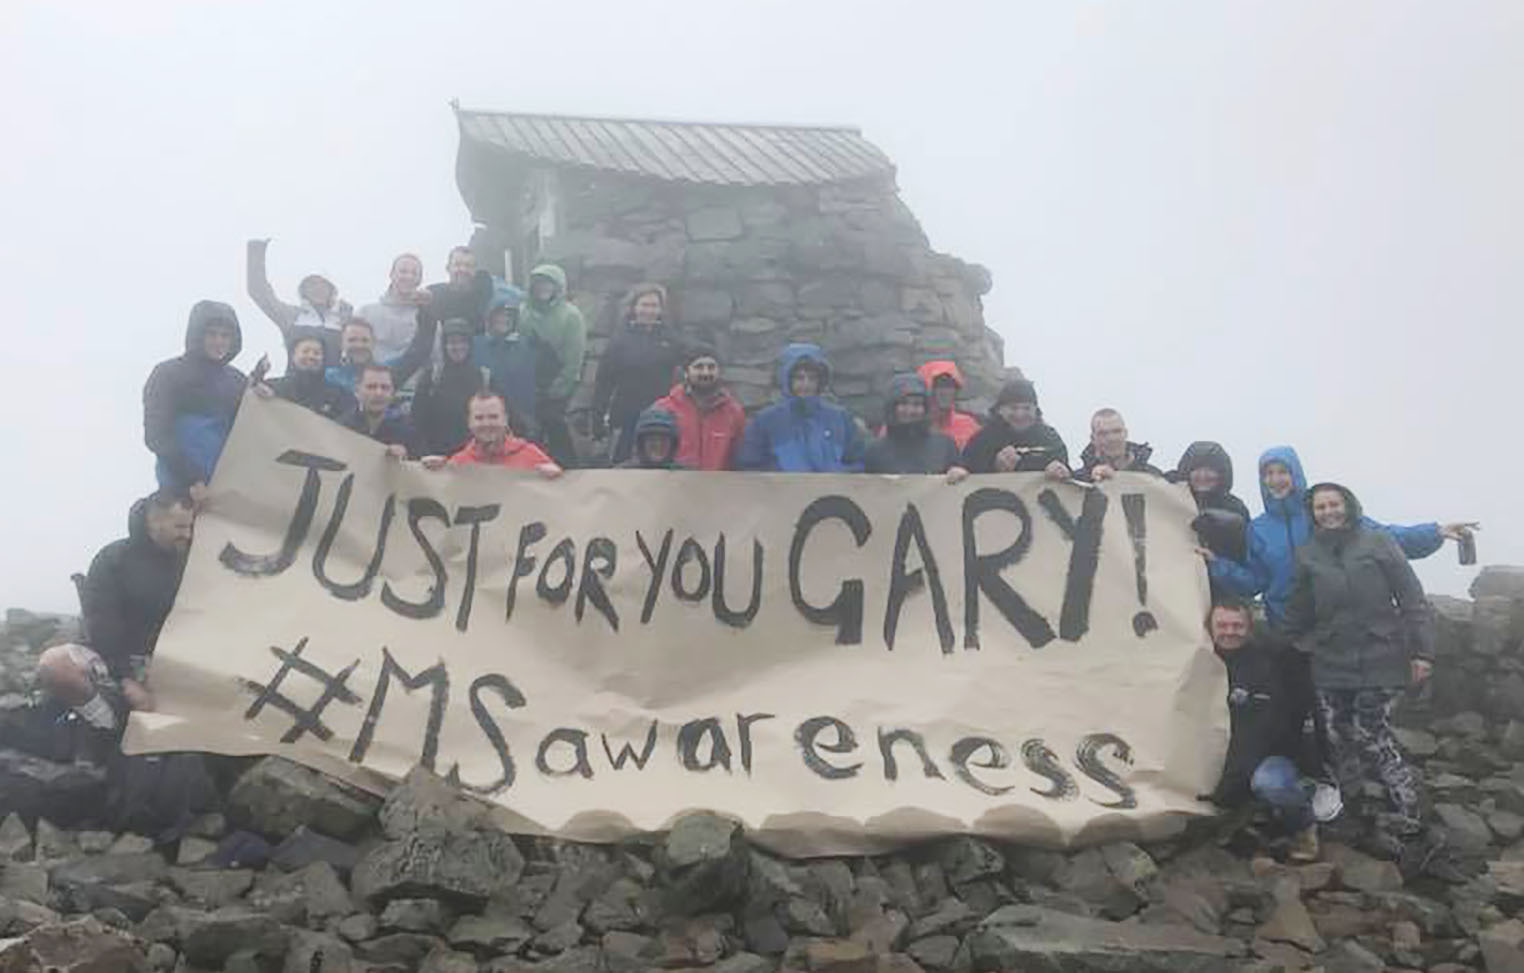 The team who set up a food stop on the summit of Ben Nevis to raise money for Gary Campbell’s MS stem cell treatment.